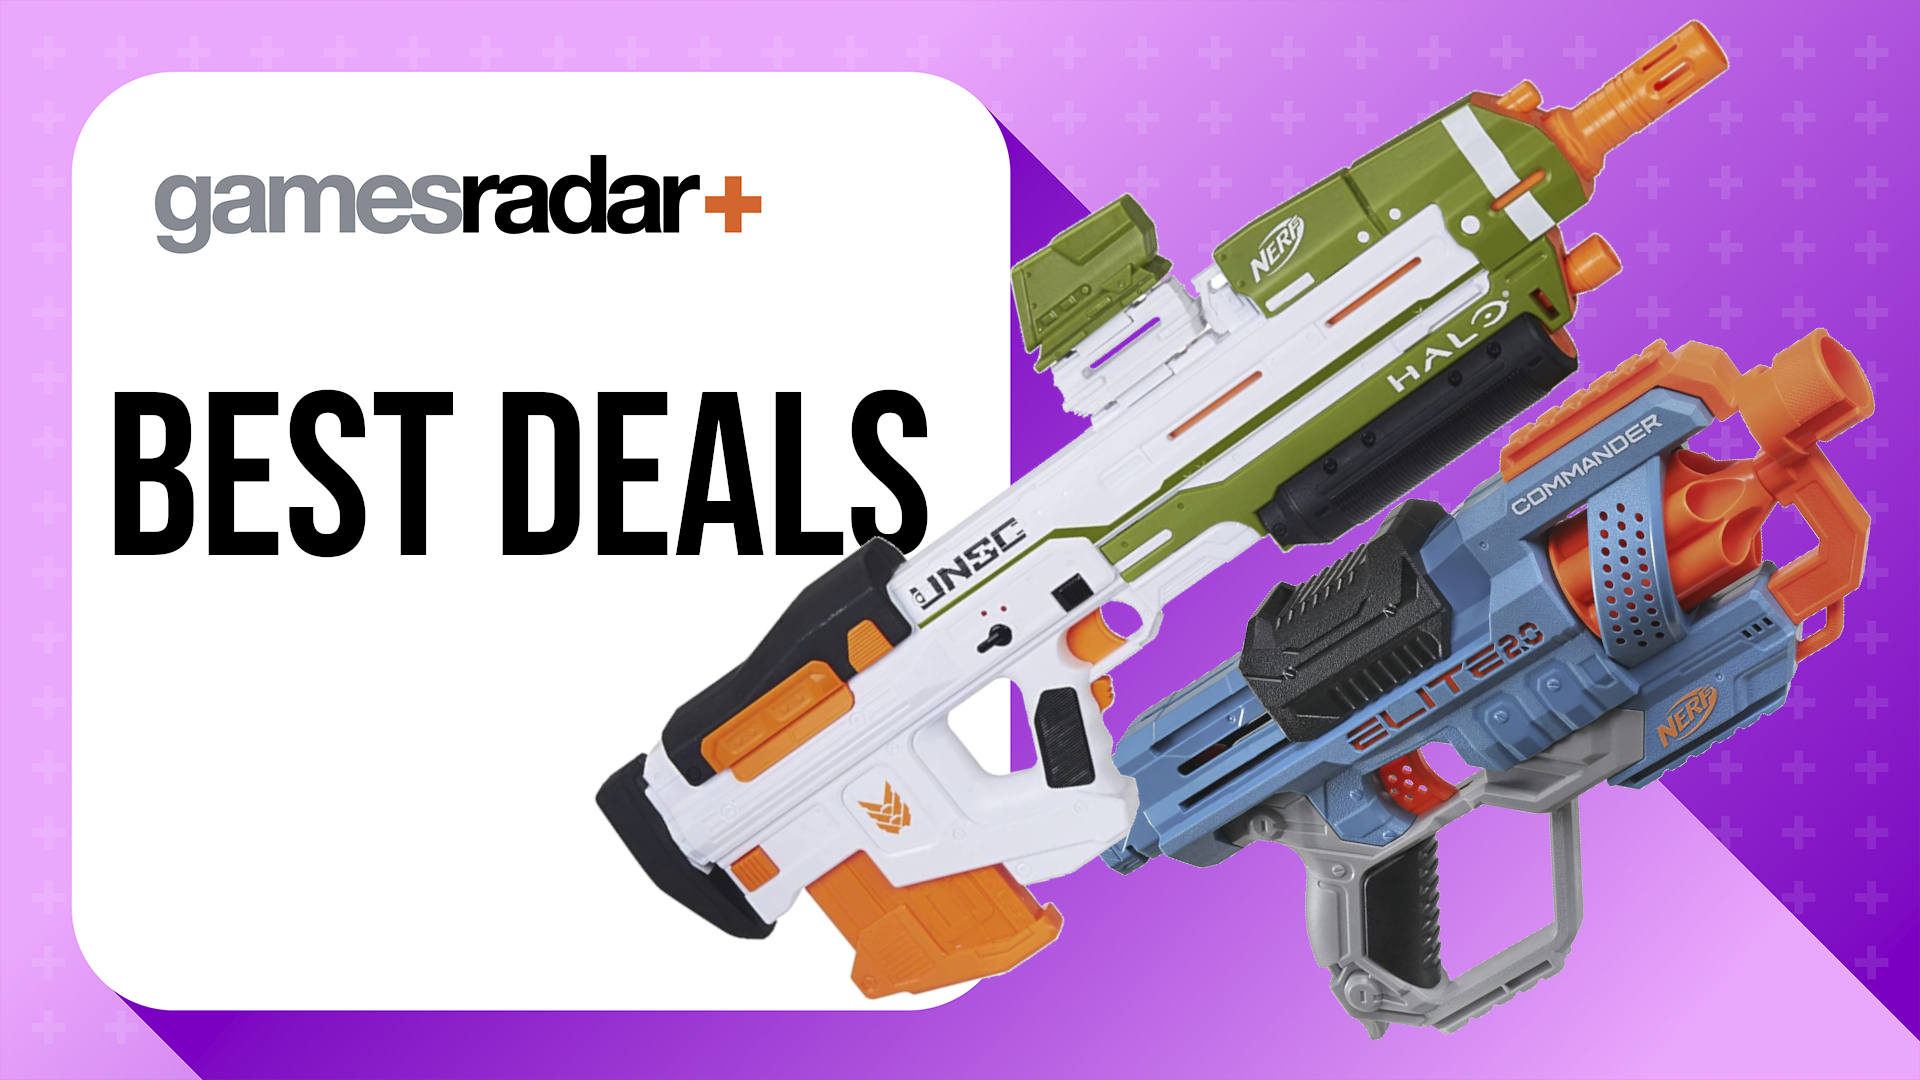 Cyber Monday toy deals with Nerf blasters